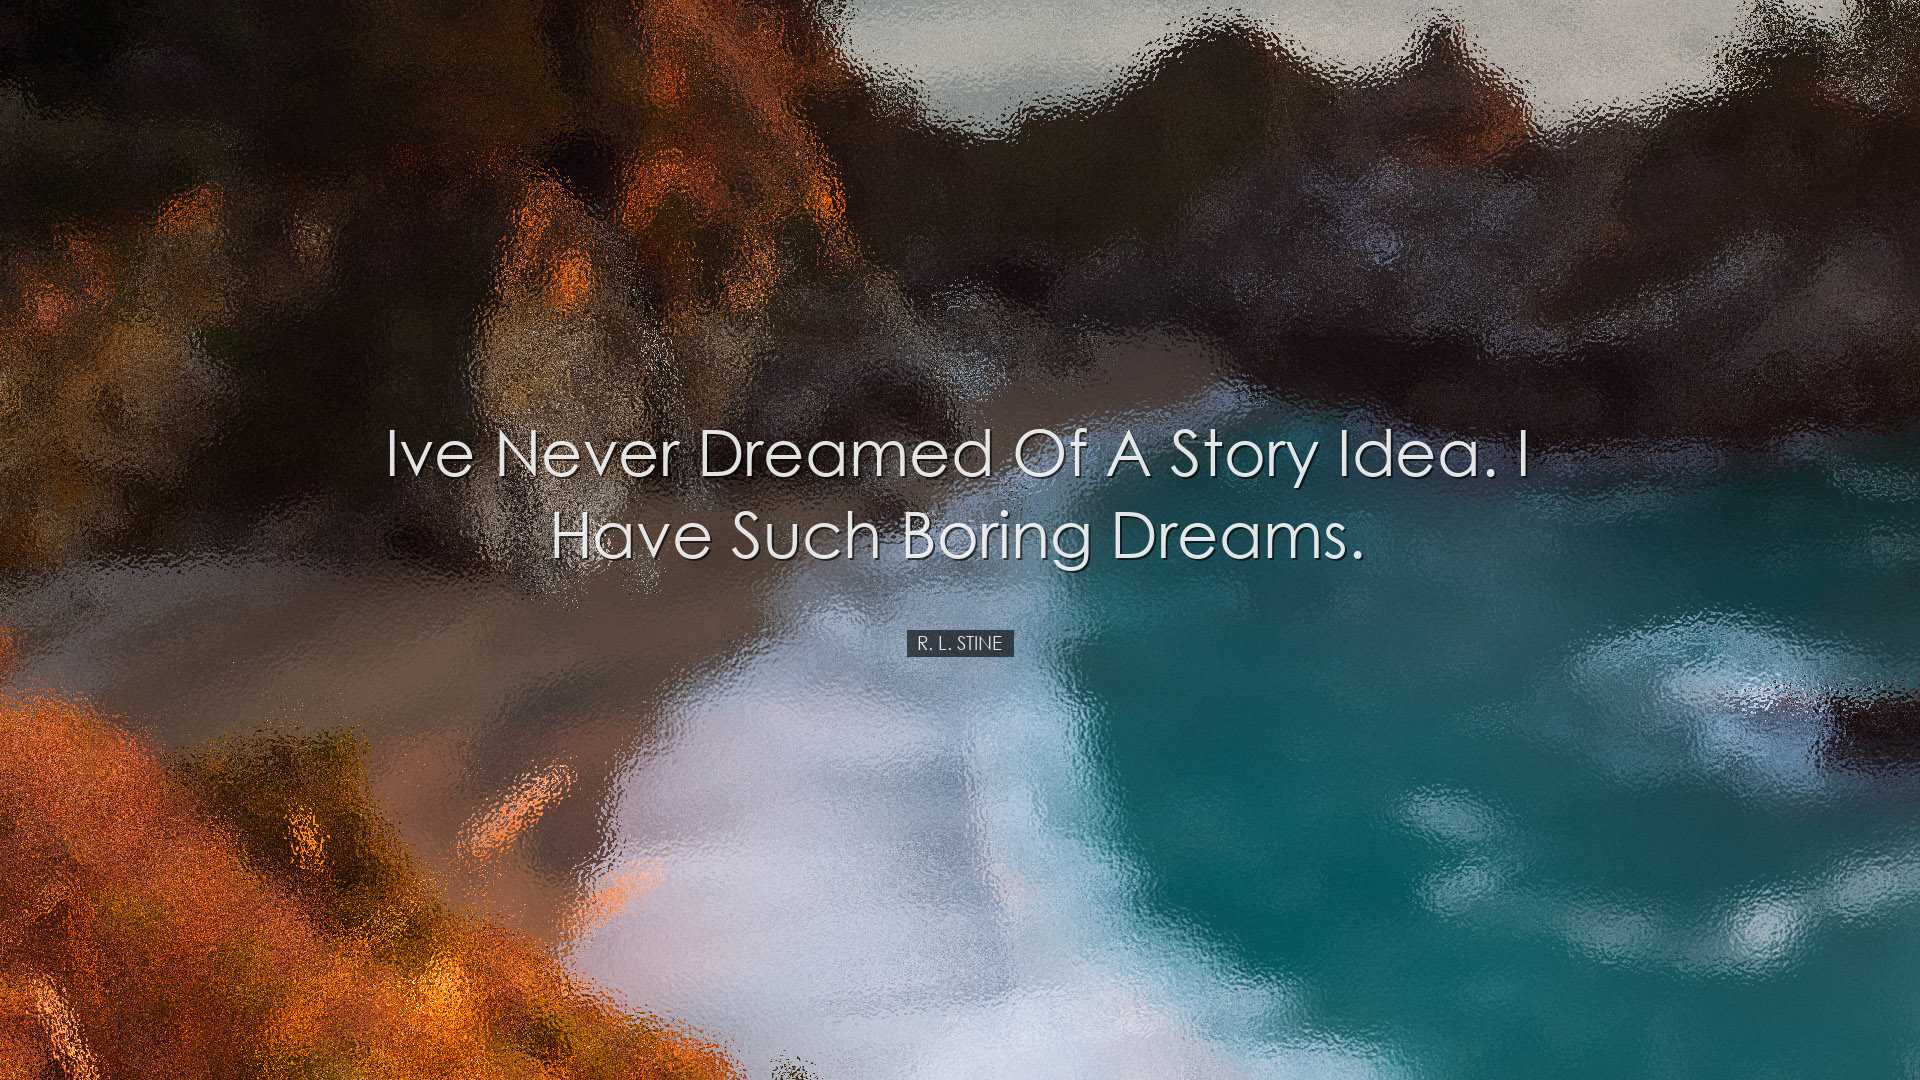 Ive never dreamed of a story idea. I have such boring dreams. - R.